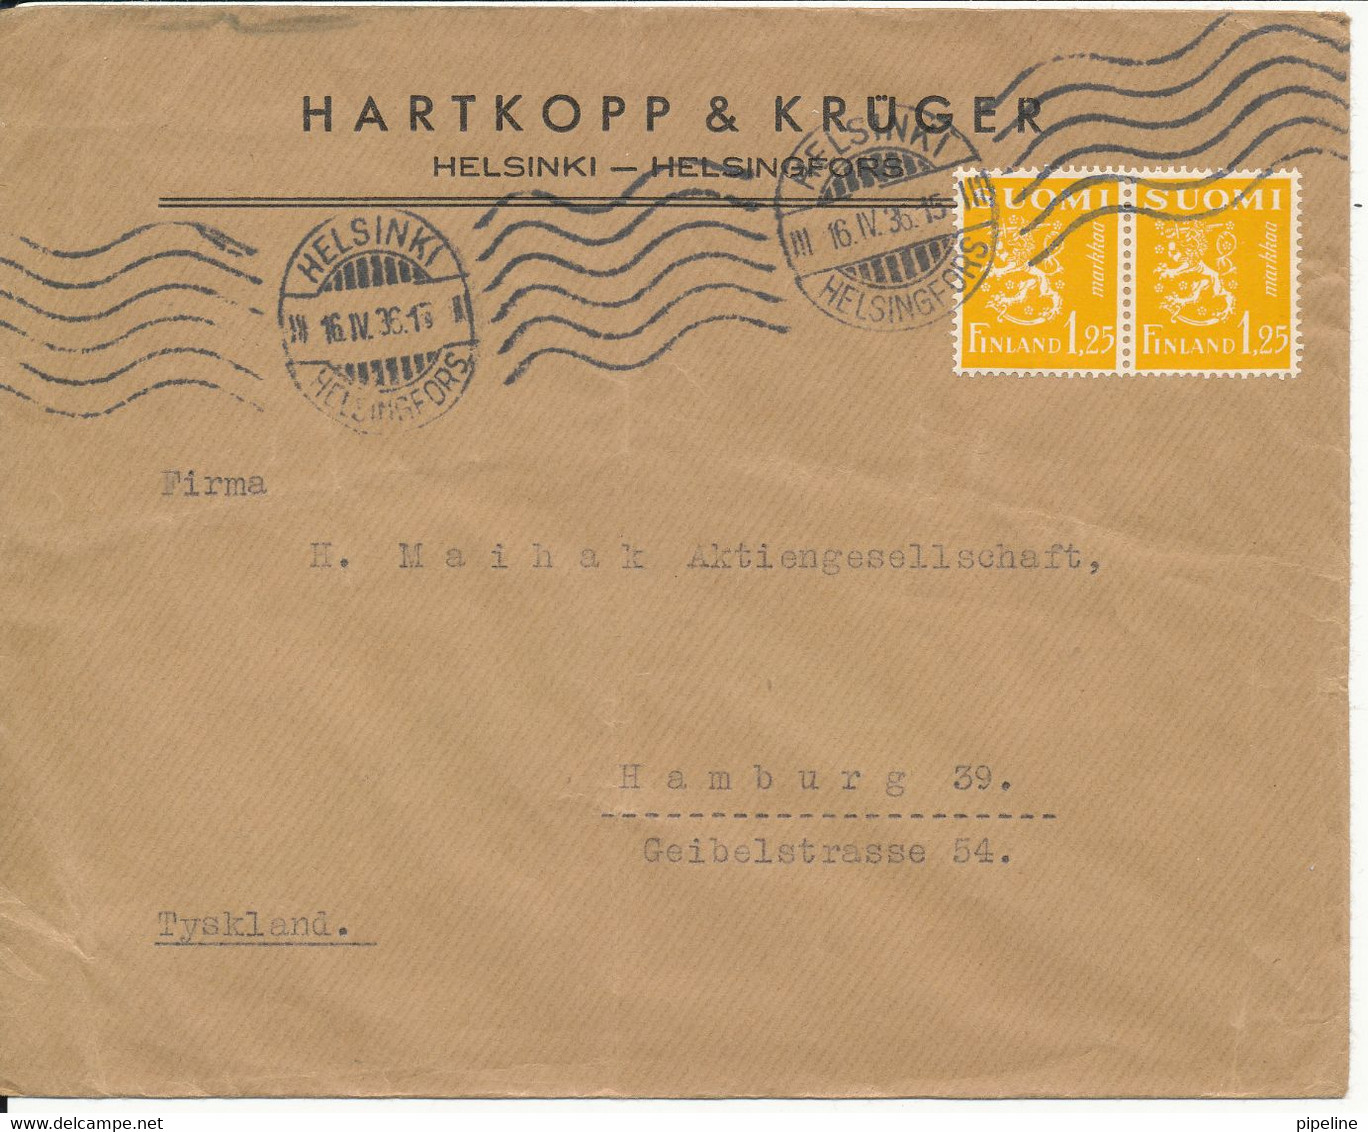 Finland Cover Sent To Germany Helsinki 16-4-1936 - Covers & Documents